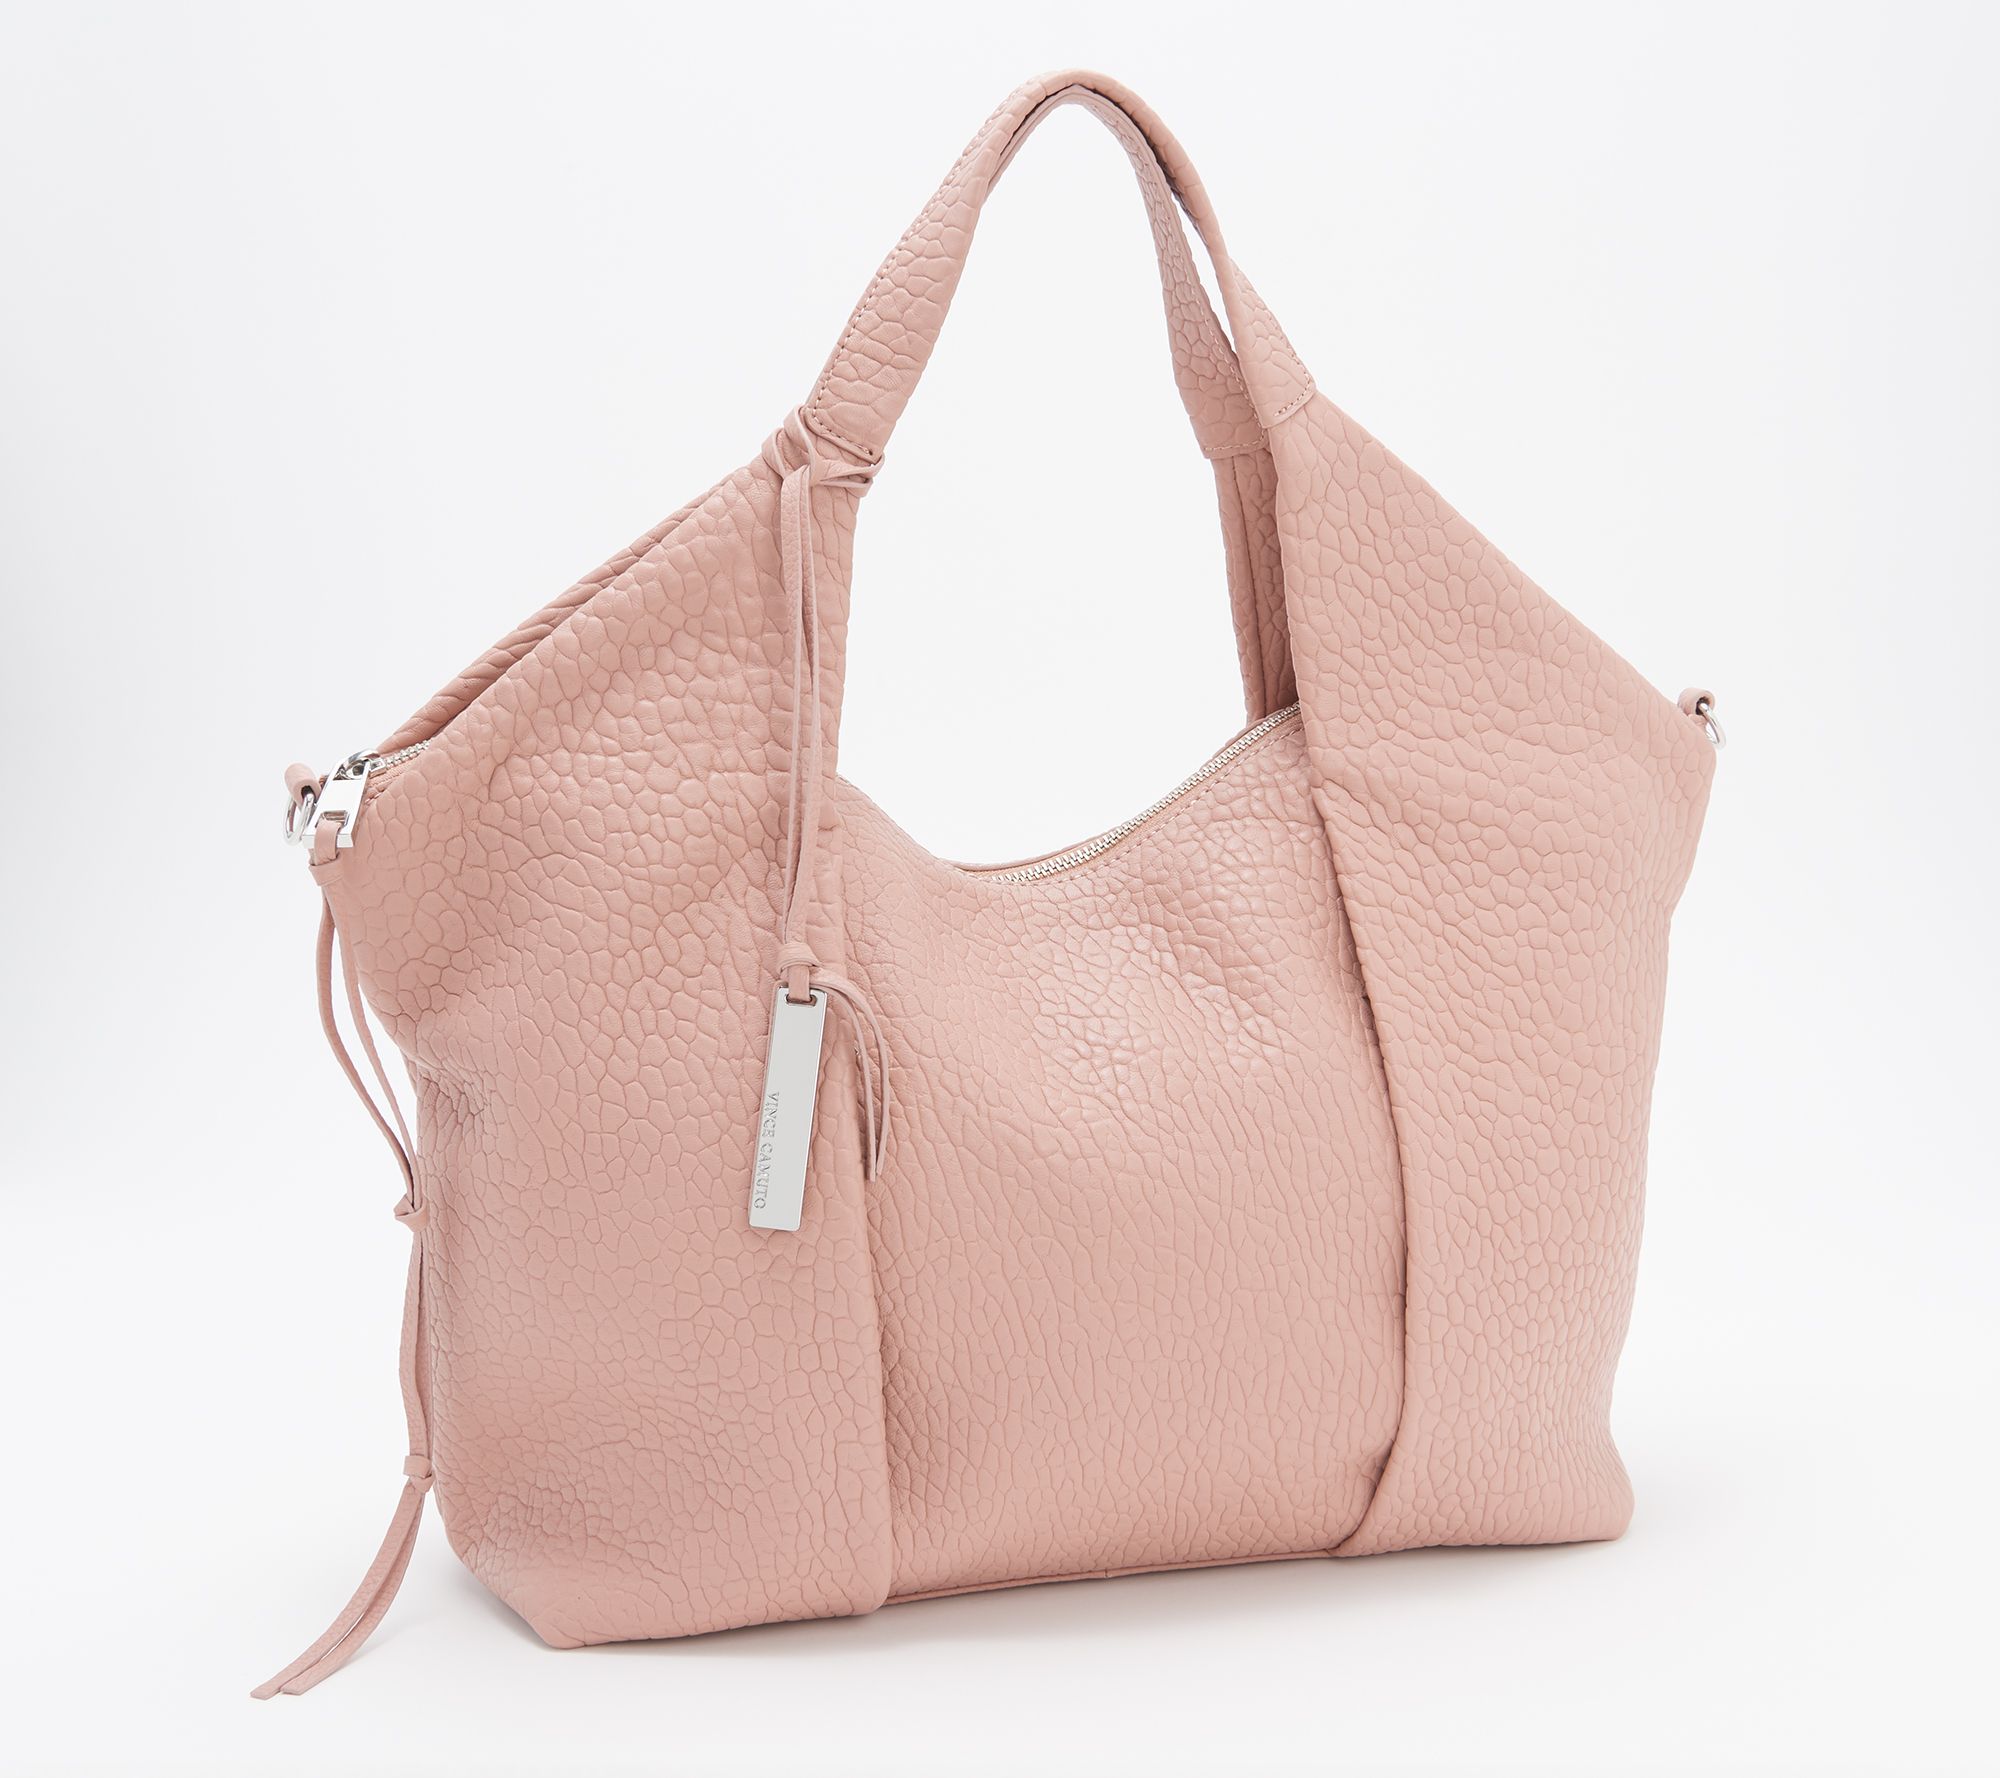  The Tote Bag for Women Pu Leather Tote Bag with Lamb